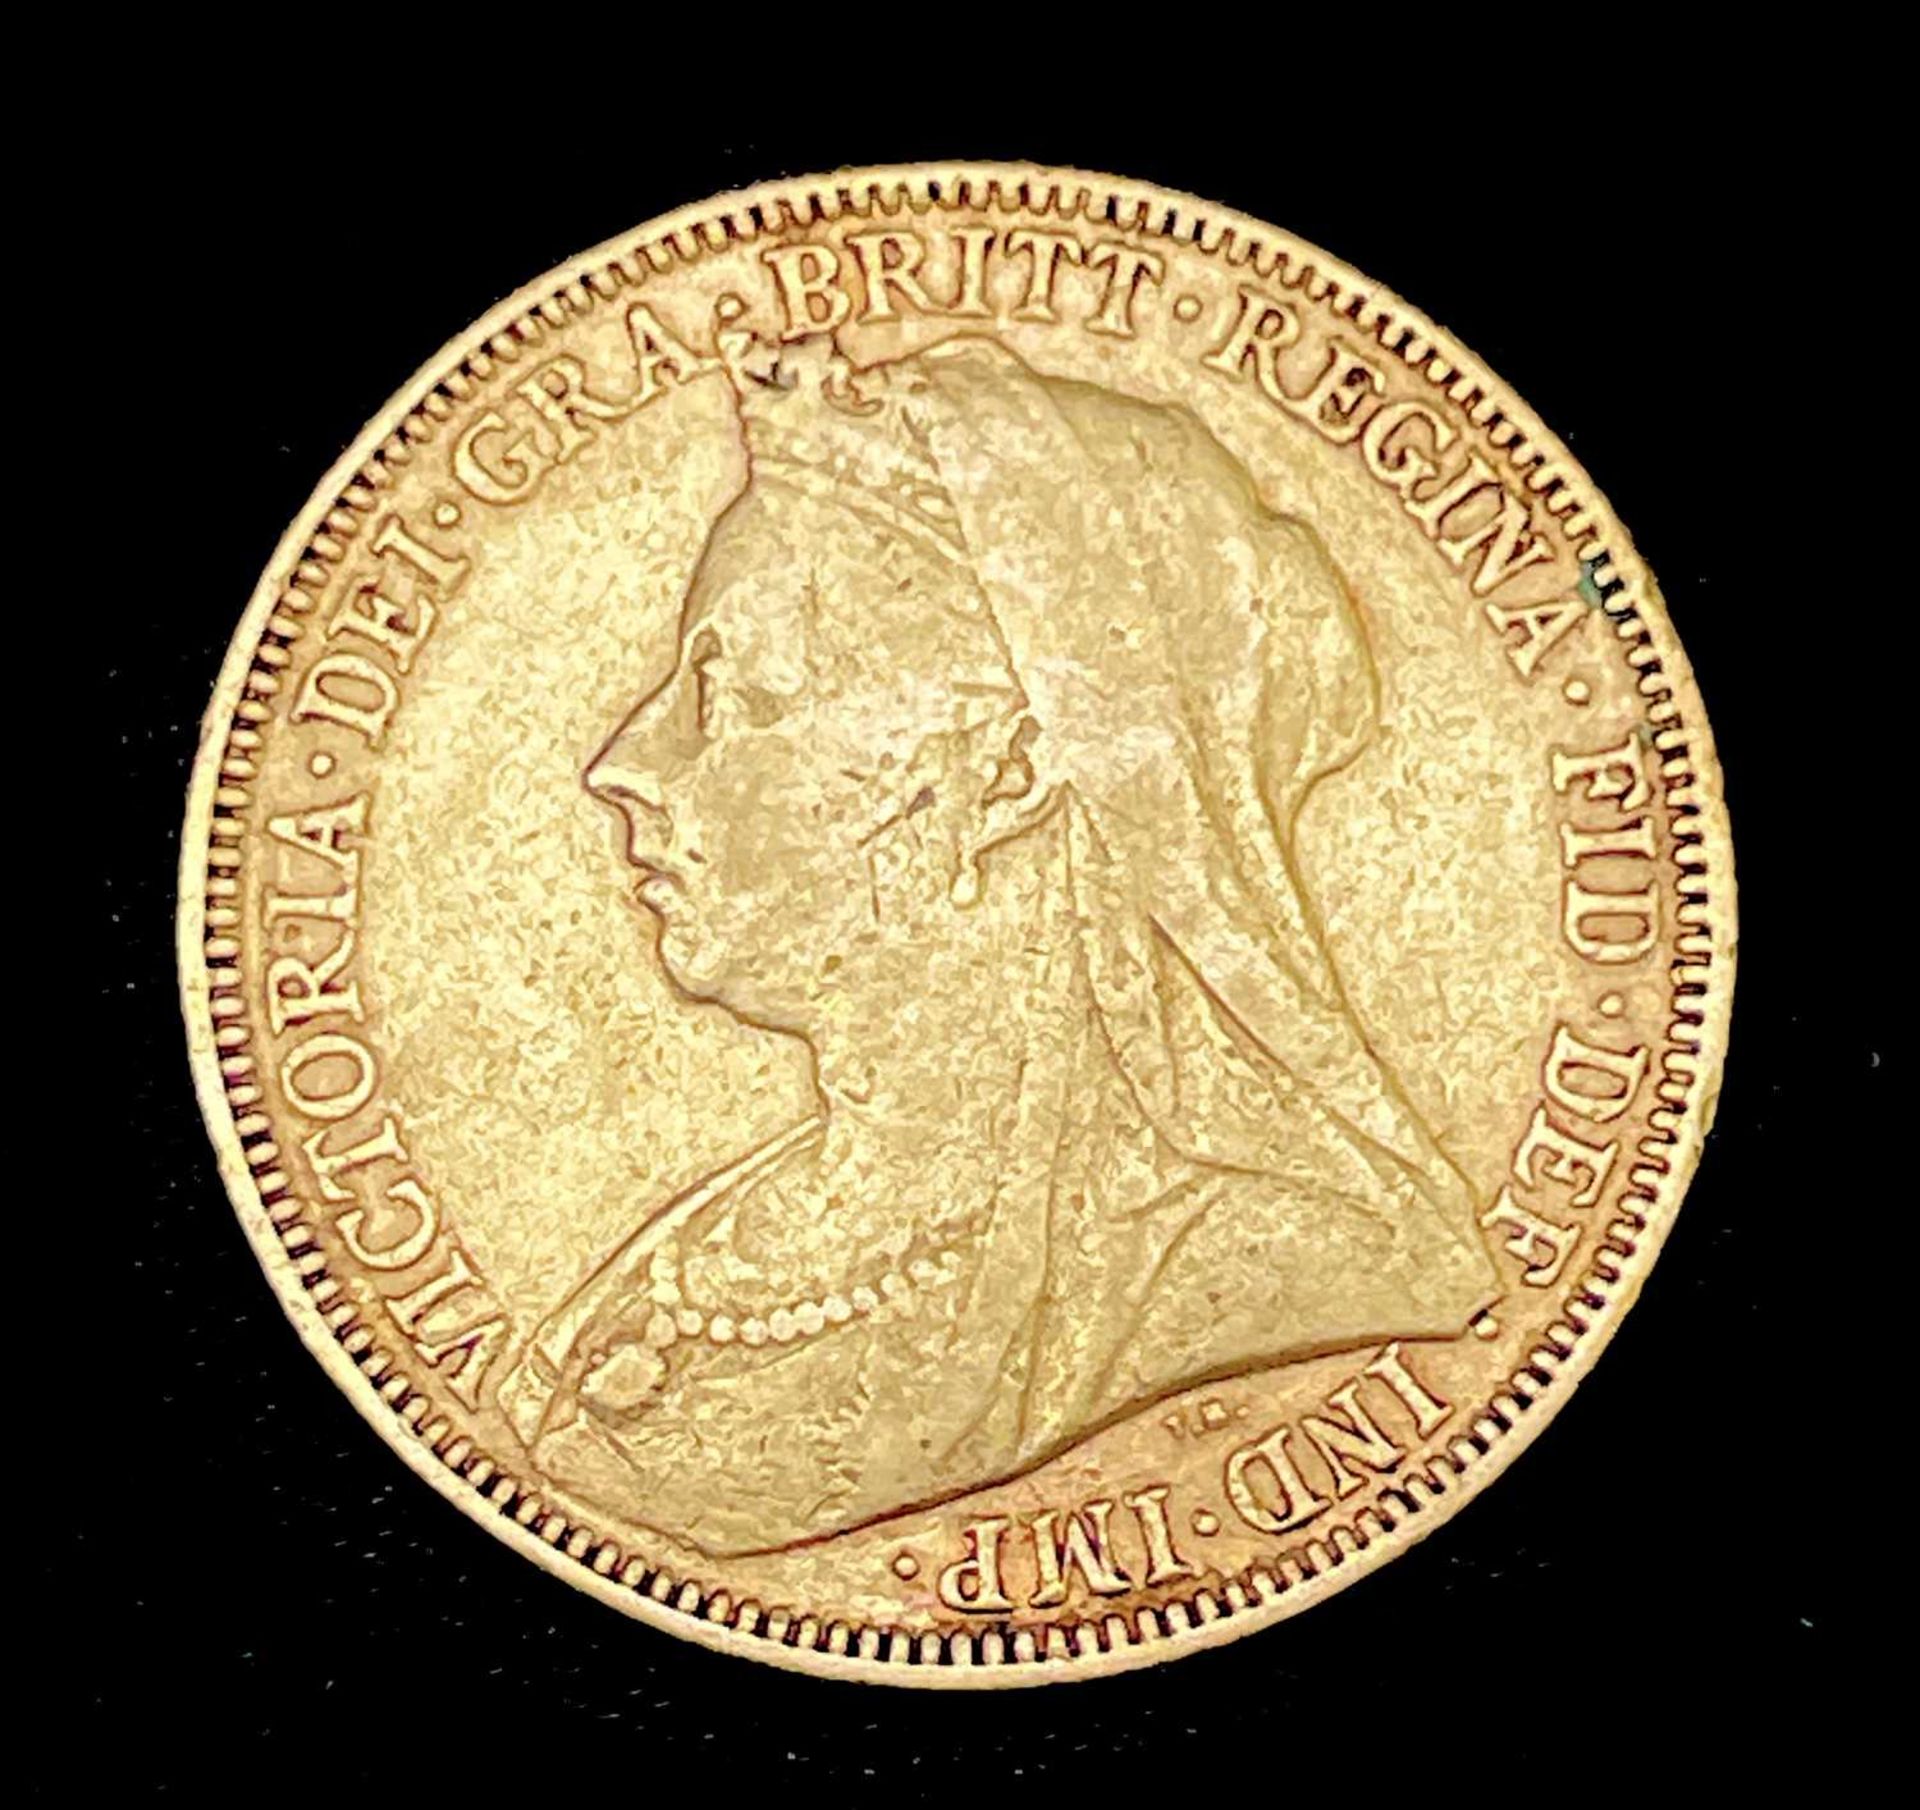 Great Britain Gold Sovereign 1895 Veiled Head Condition: please request a condition report if you - Image 2 of 2